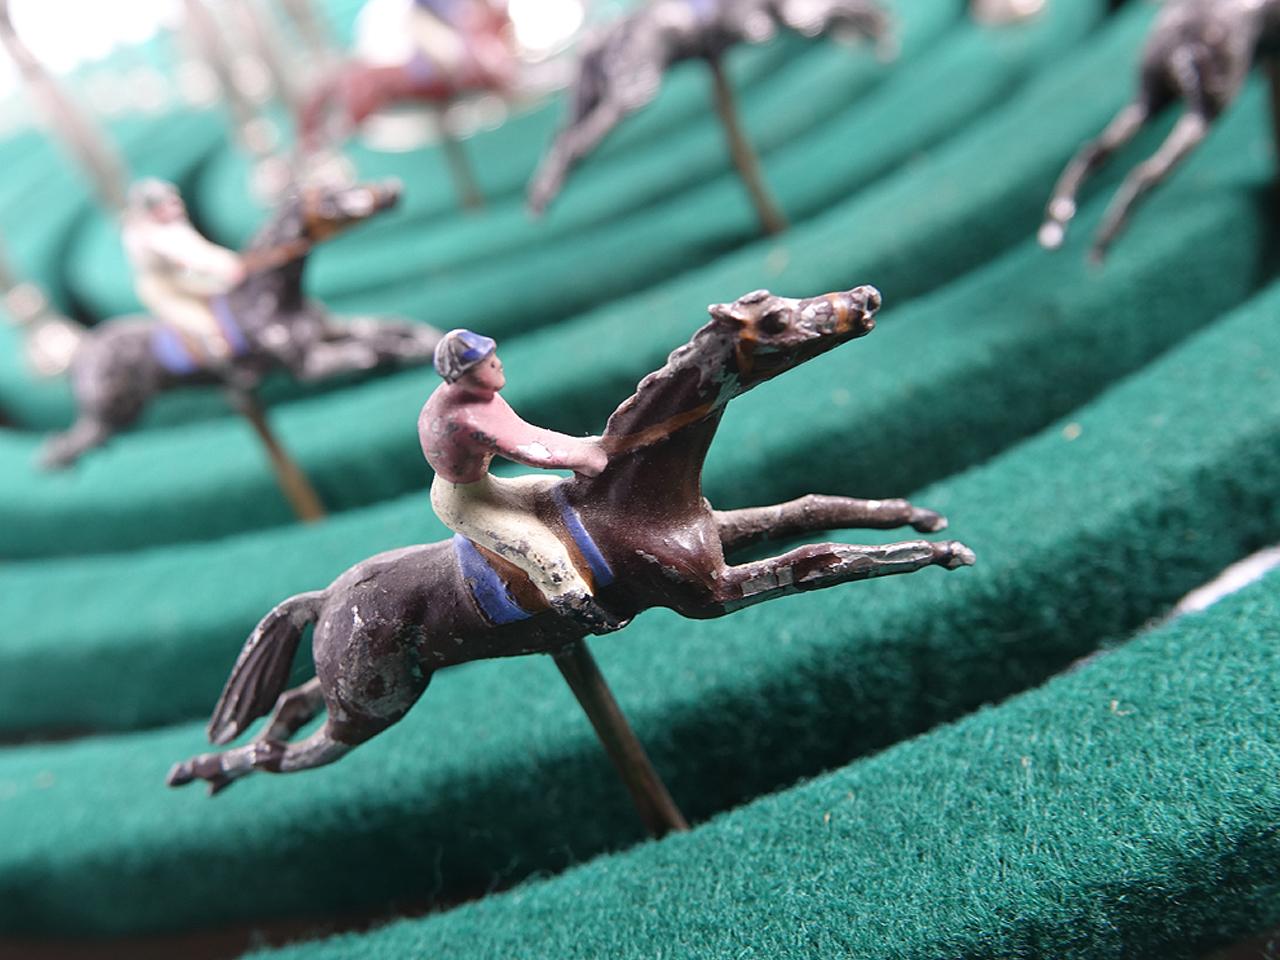 Industrial Large Mechanical “Petits Chevaux” Horse Race Table